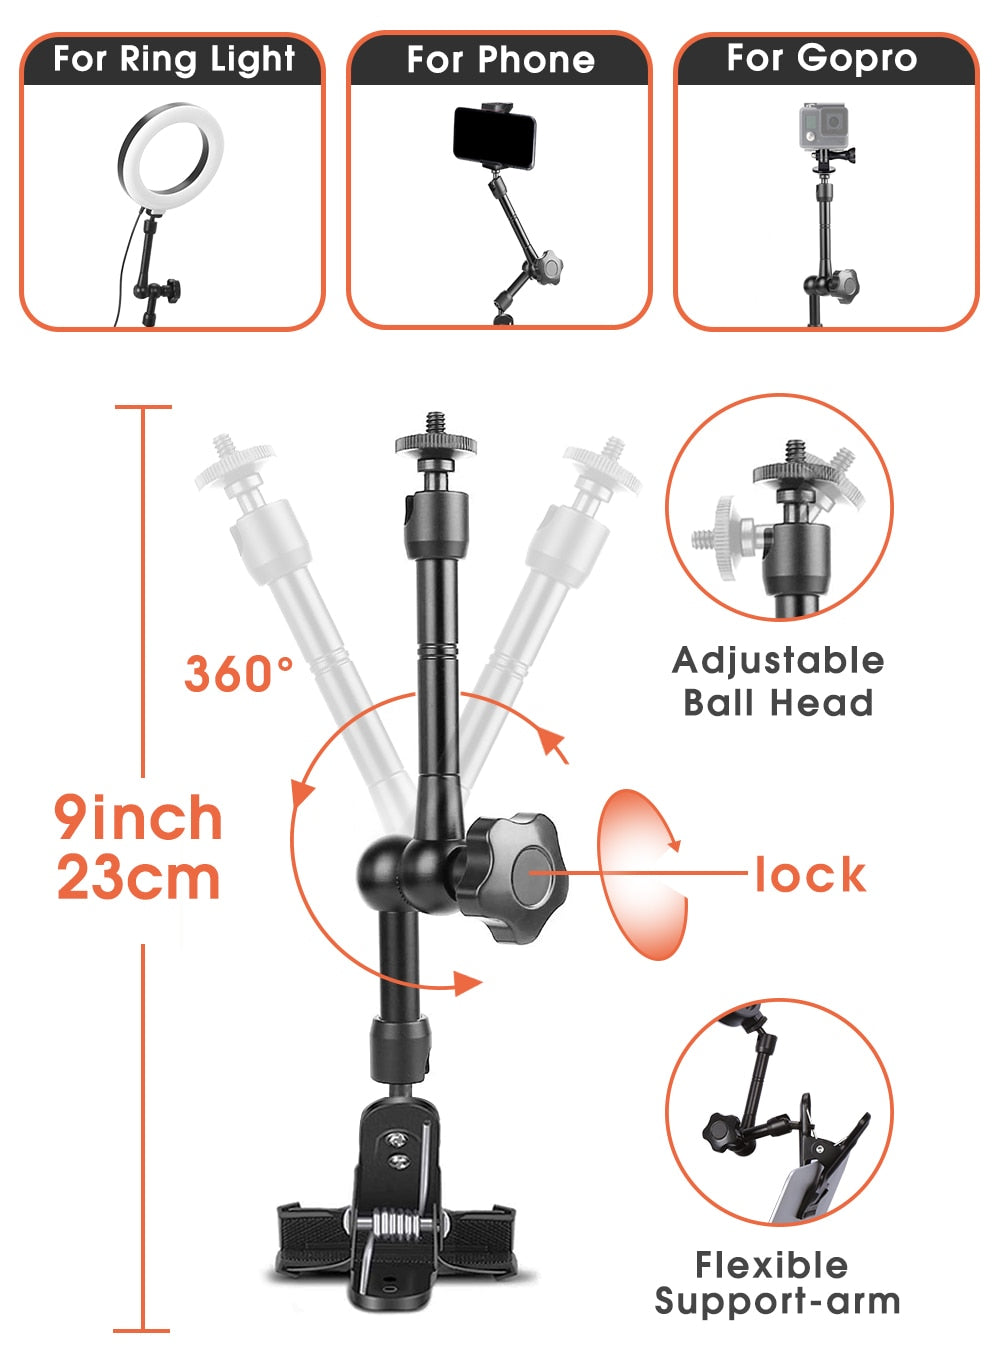 Conference Lighting Kit With Tripod Holder - SpaceEleven